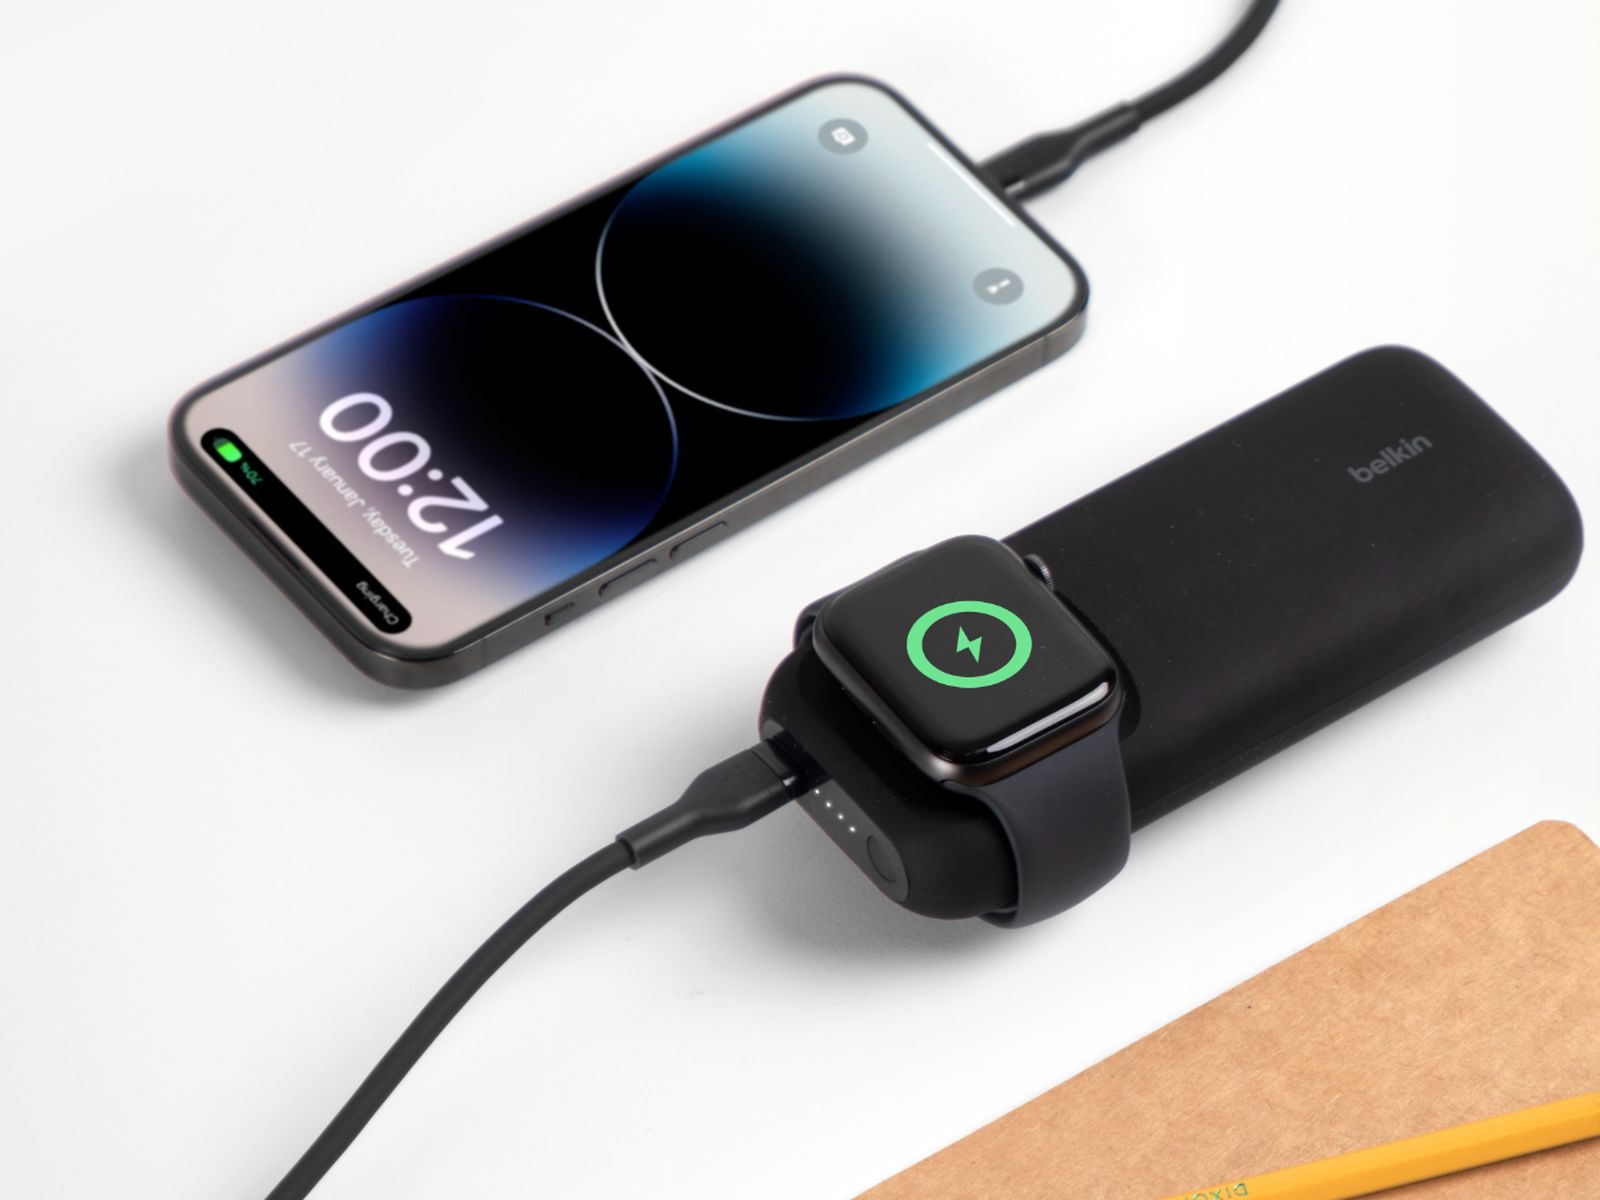 Belkin Launches BoostCharge Pro Power Bank With Apple Watch Fast-Charging  and 20W USB-C PD Port for $99.99 - MacRumors